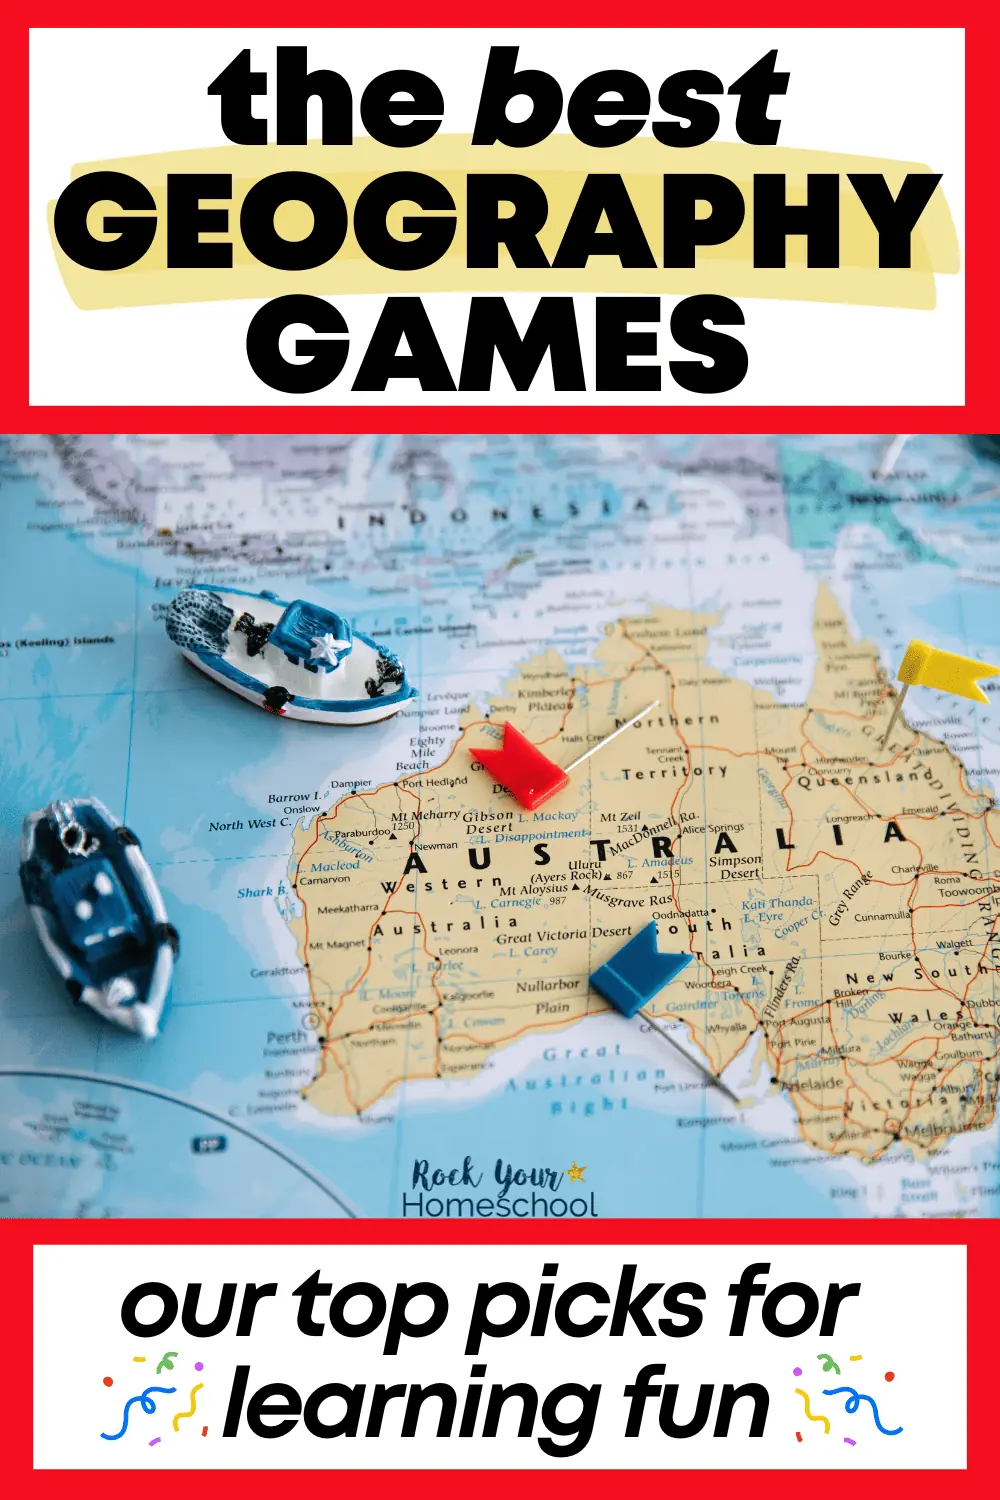 Geography Board Games: Top Picks for Learning Fun with Kids